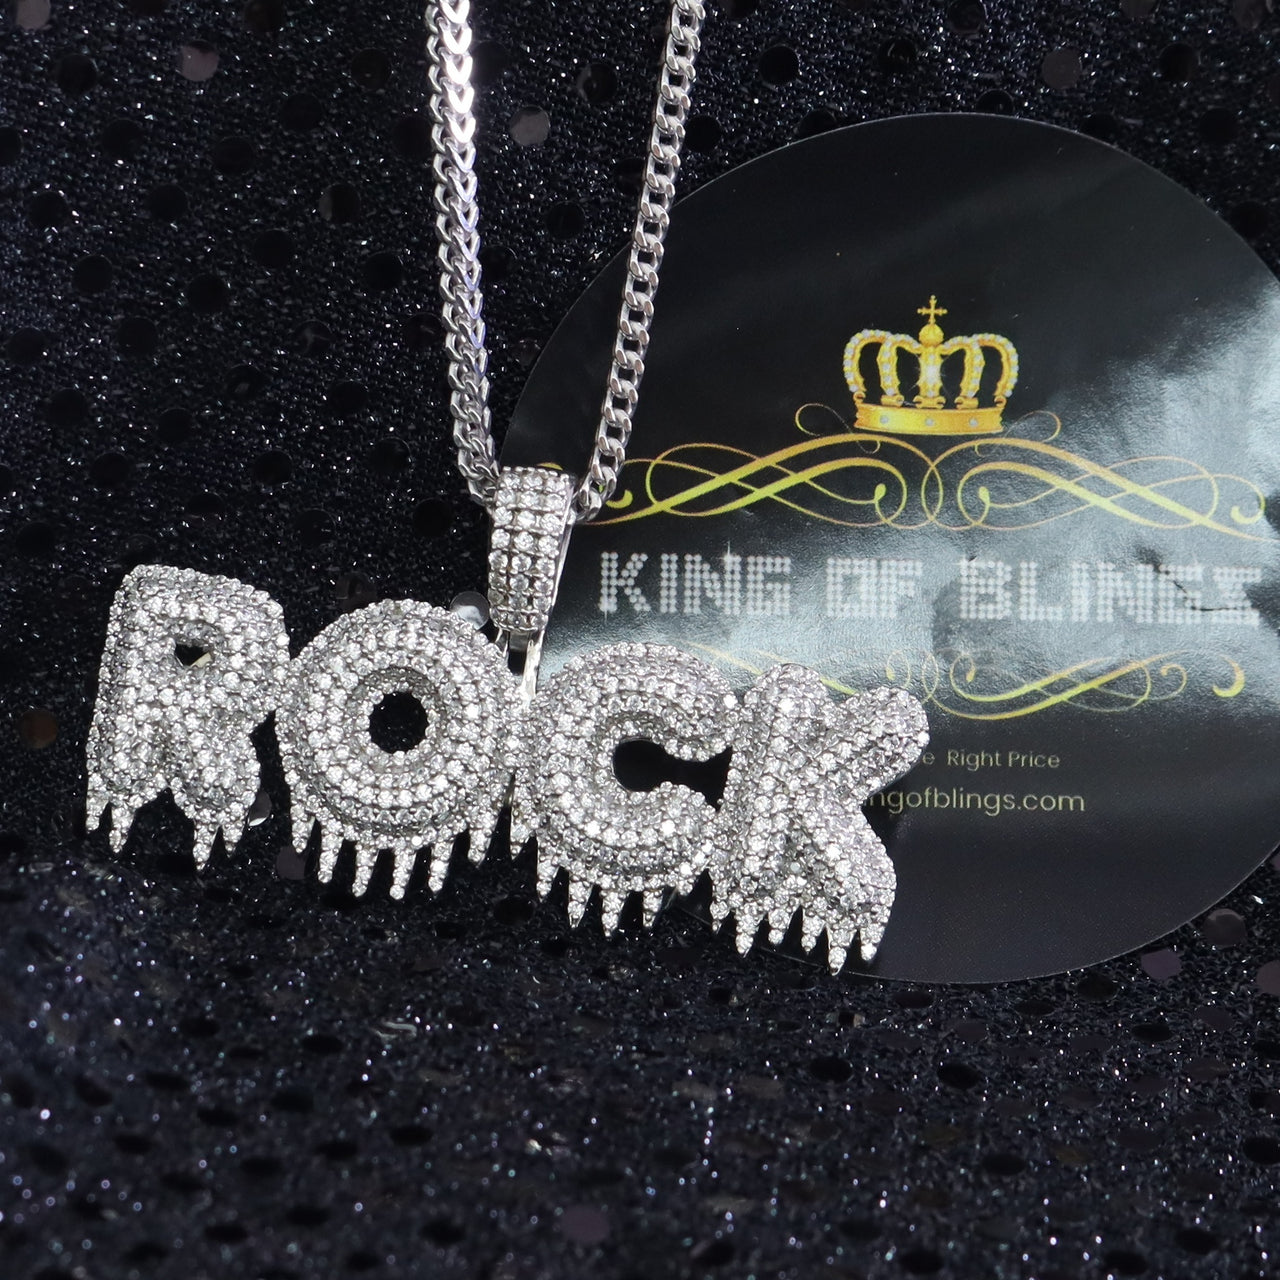 Create Your Own Custom Design in 925 Sterling Silver Dripping ROCK 2.75inch Pendant in Cubic Zirconia KING OF BLINGS